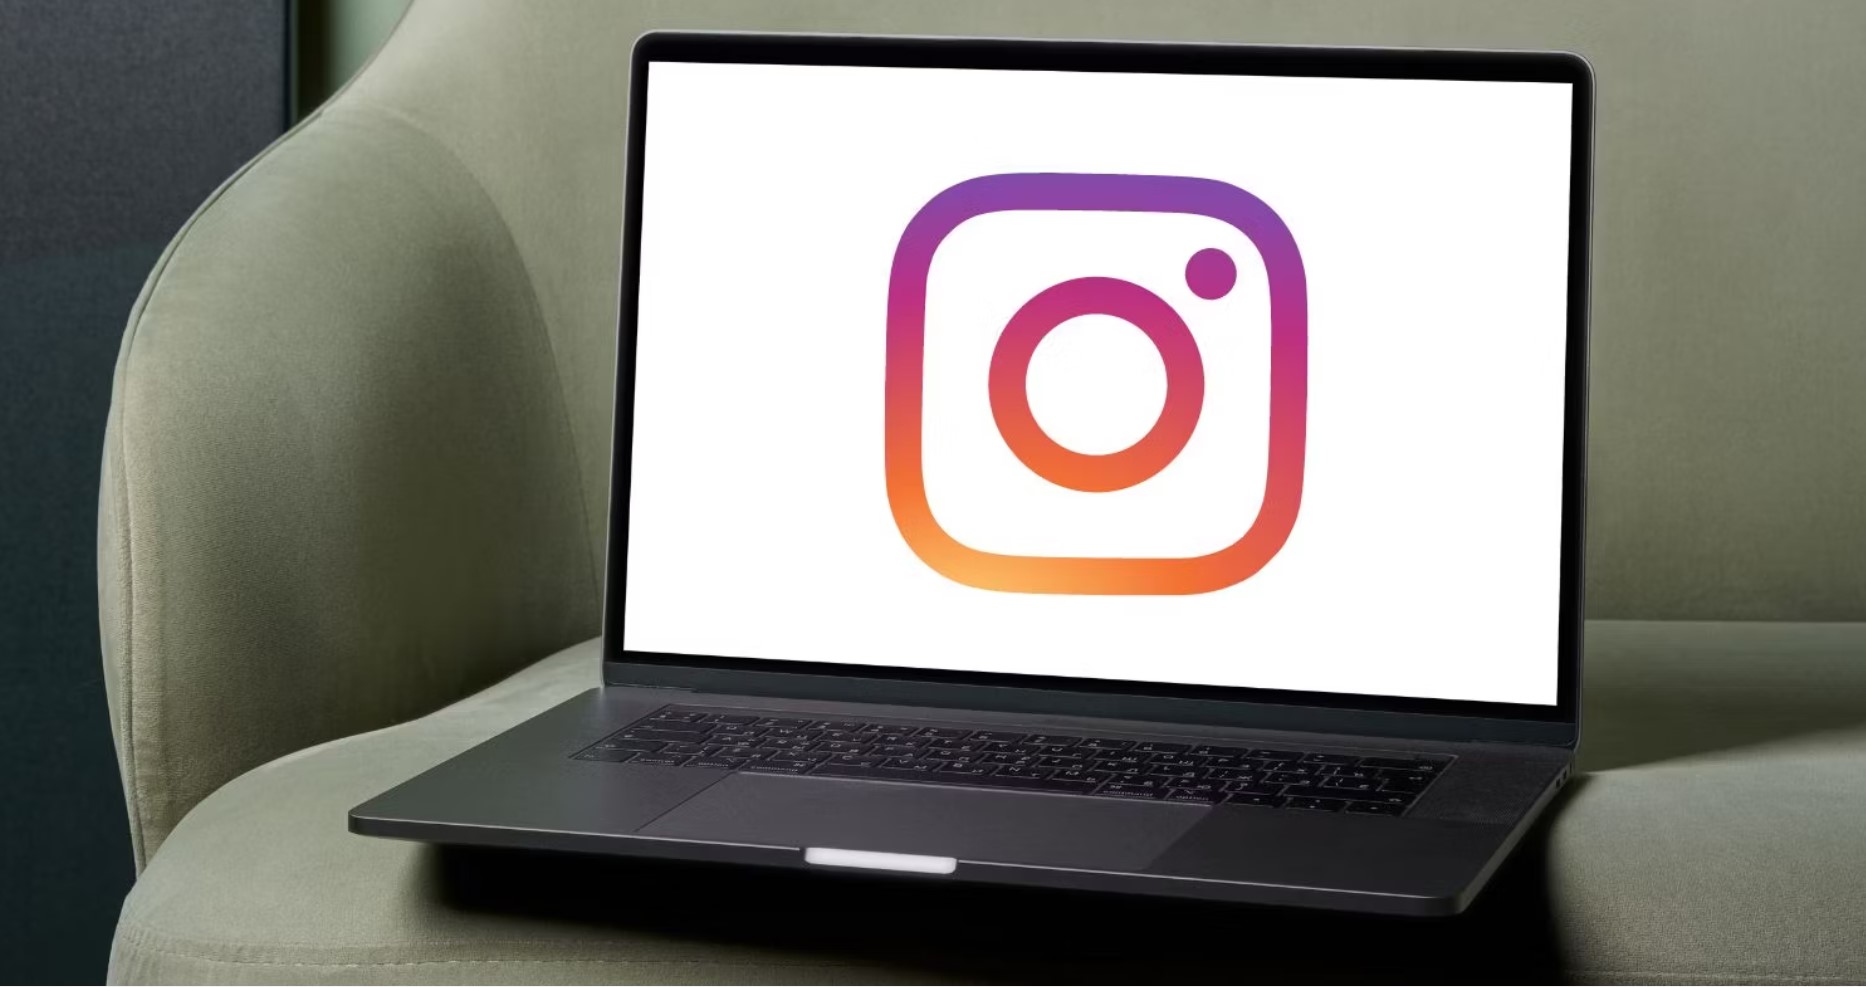 How to download Instagram Reels and Videos to PC